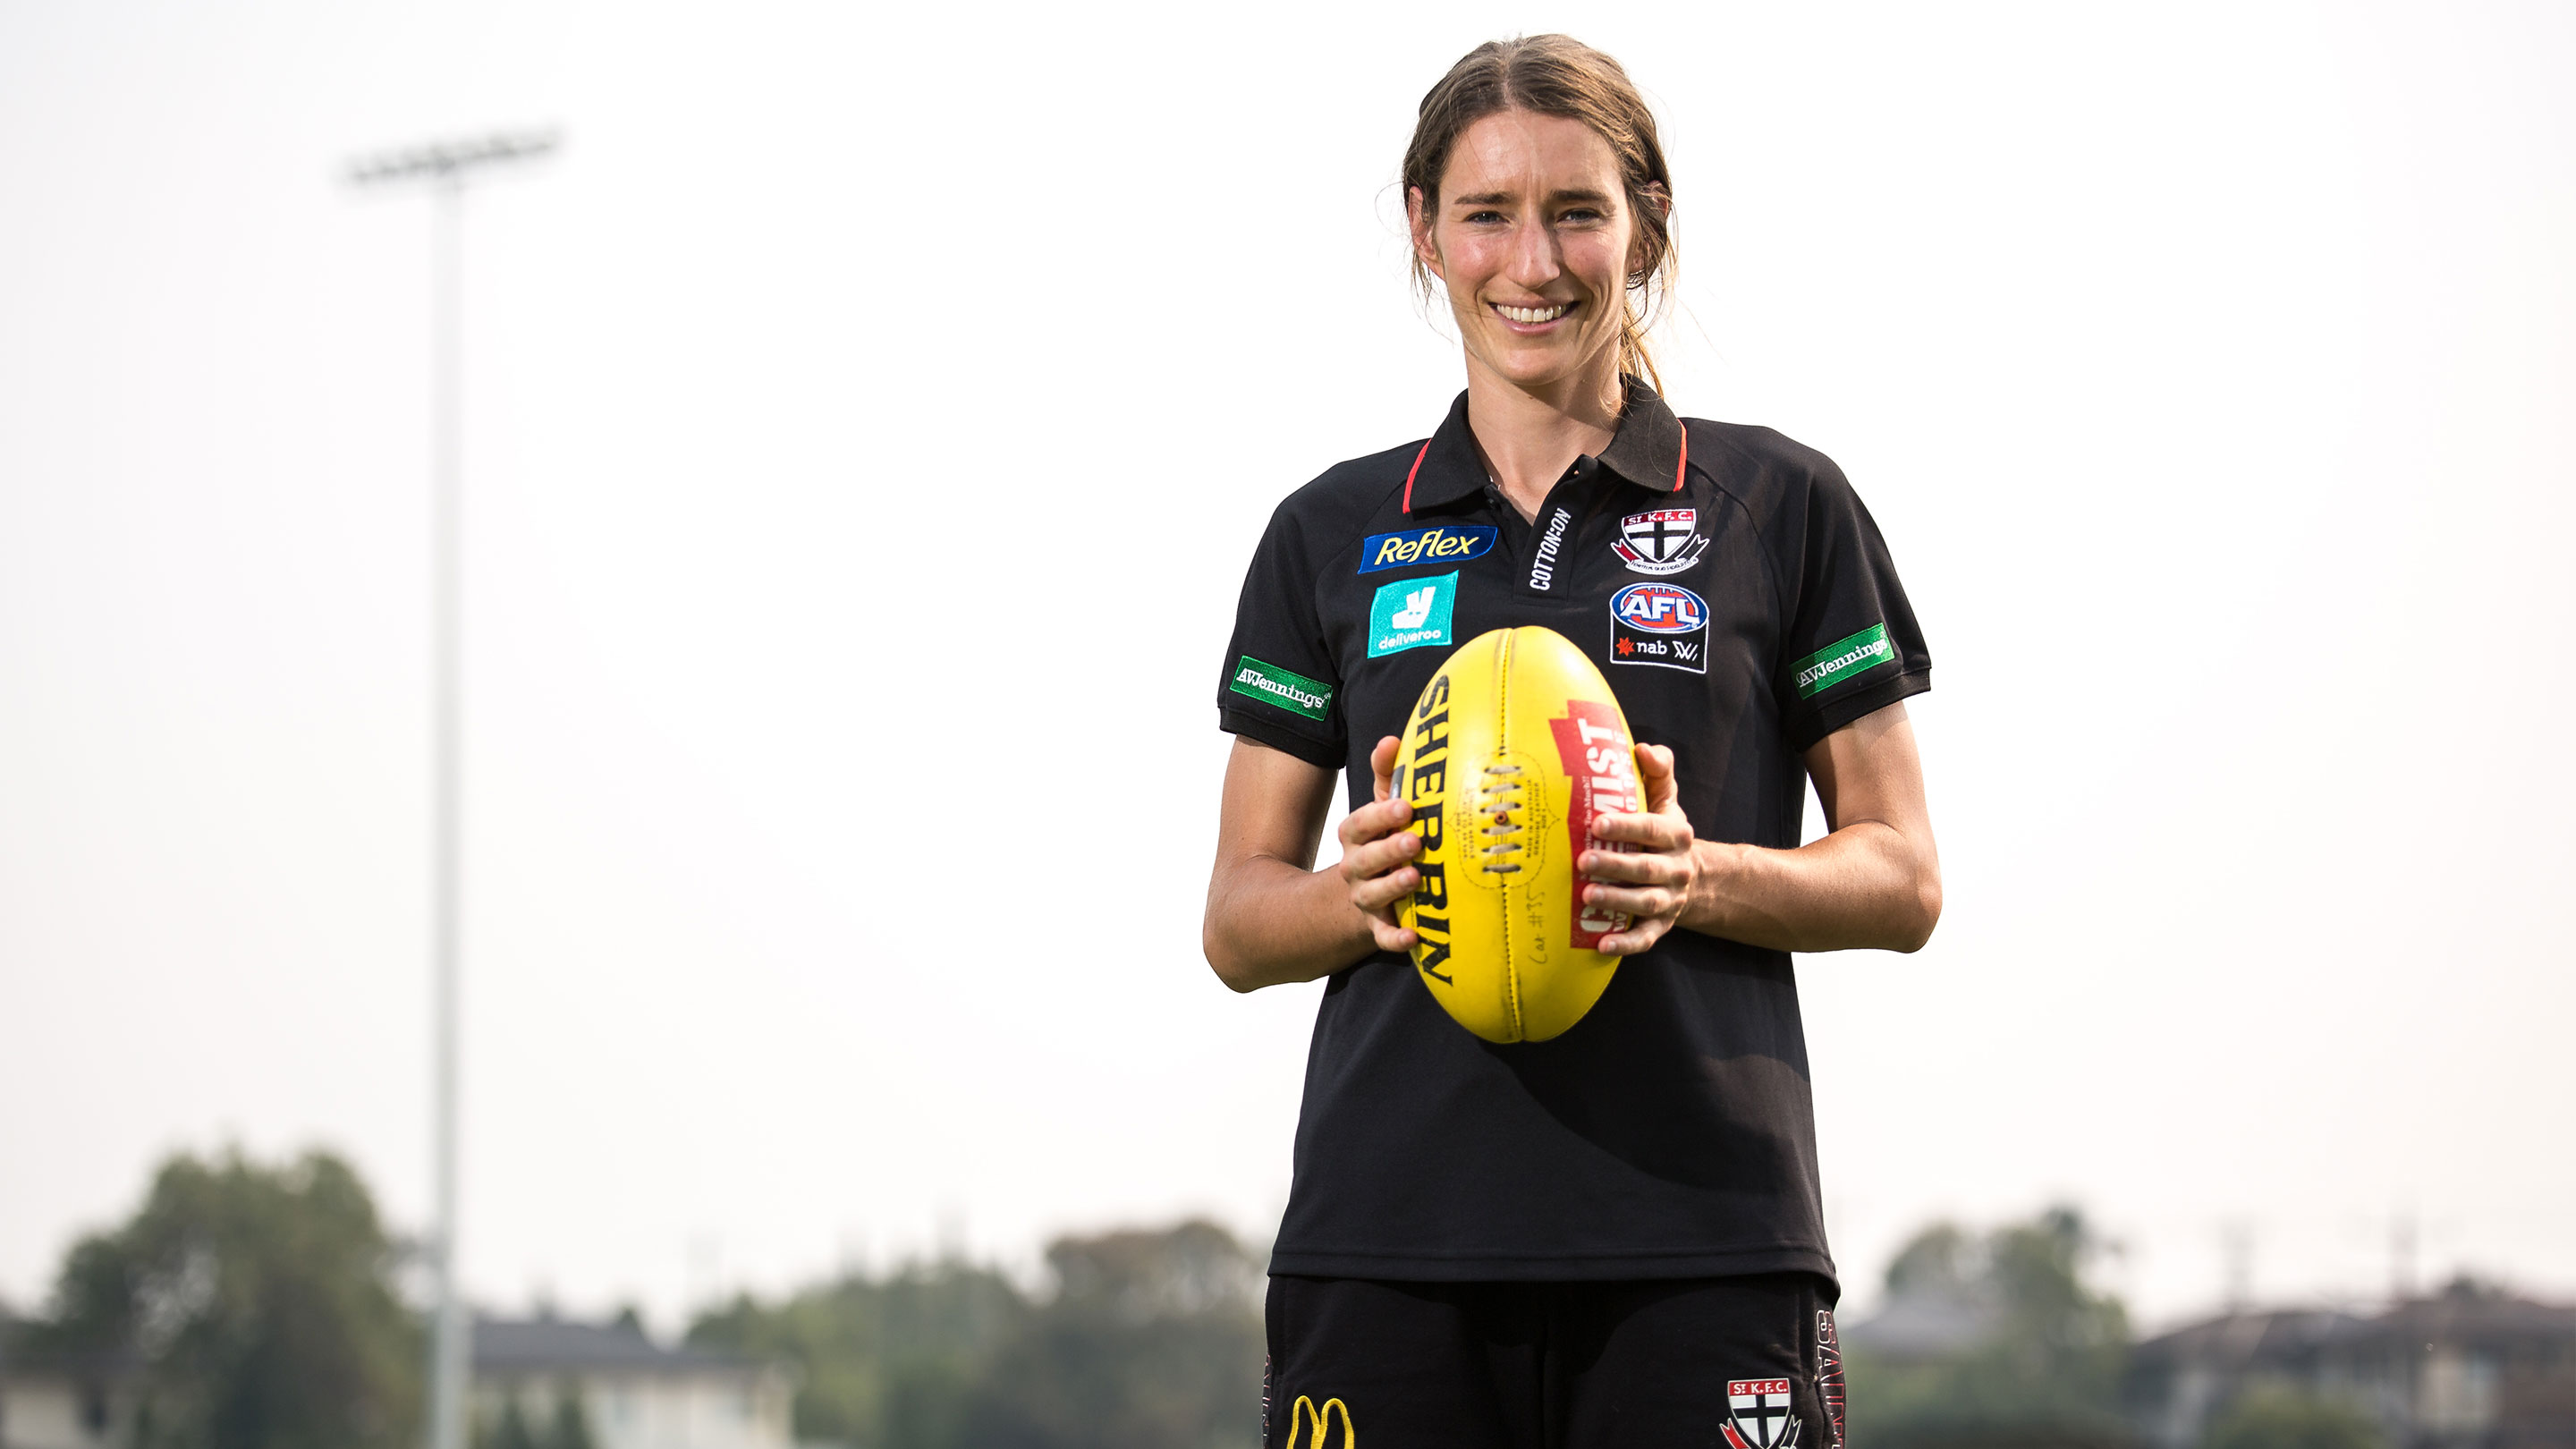 Image Cat says she has seen first-hand the impact sport can have on driving cultural change, and is passionate about using her platform as an AFL player to continue working towards a more equitable society.